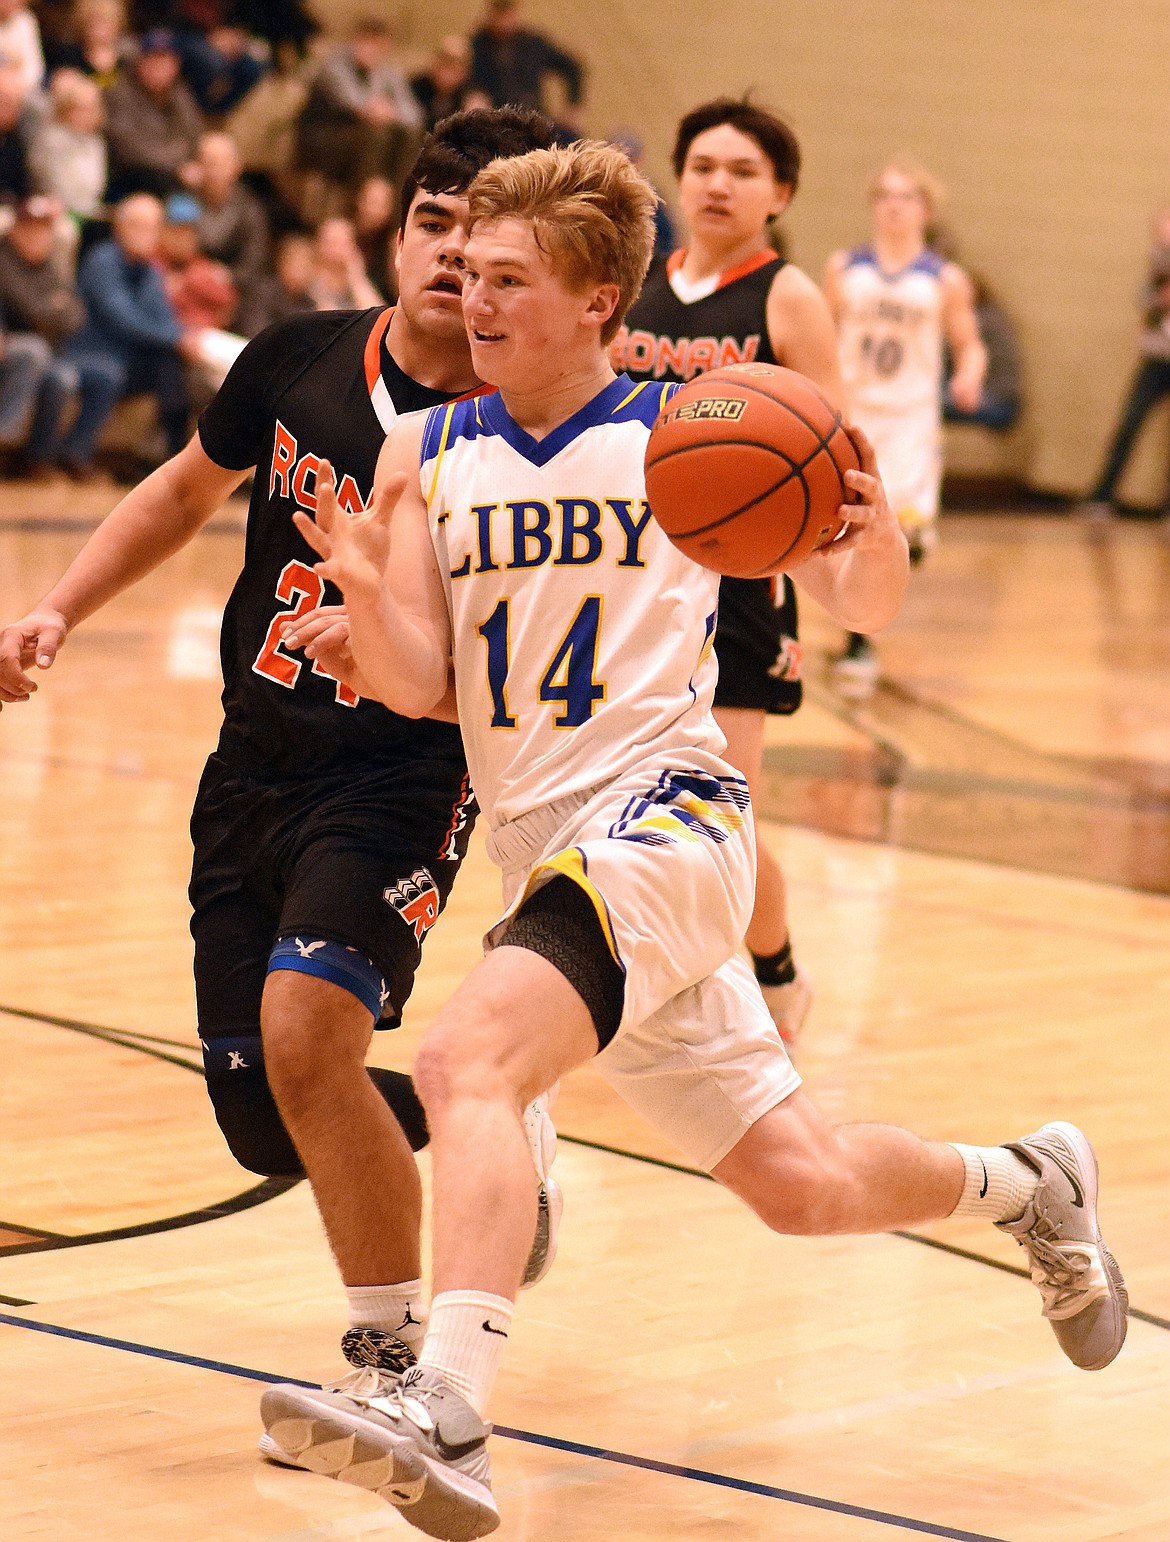 Chandler Bower of the Libby Loggers drives toward the basket Feb. 24. (Duncan Adams/The Western News)